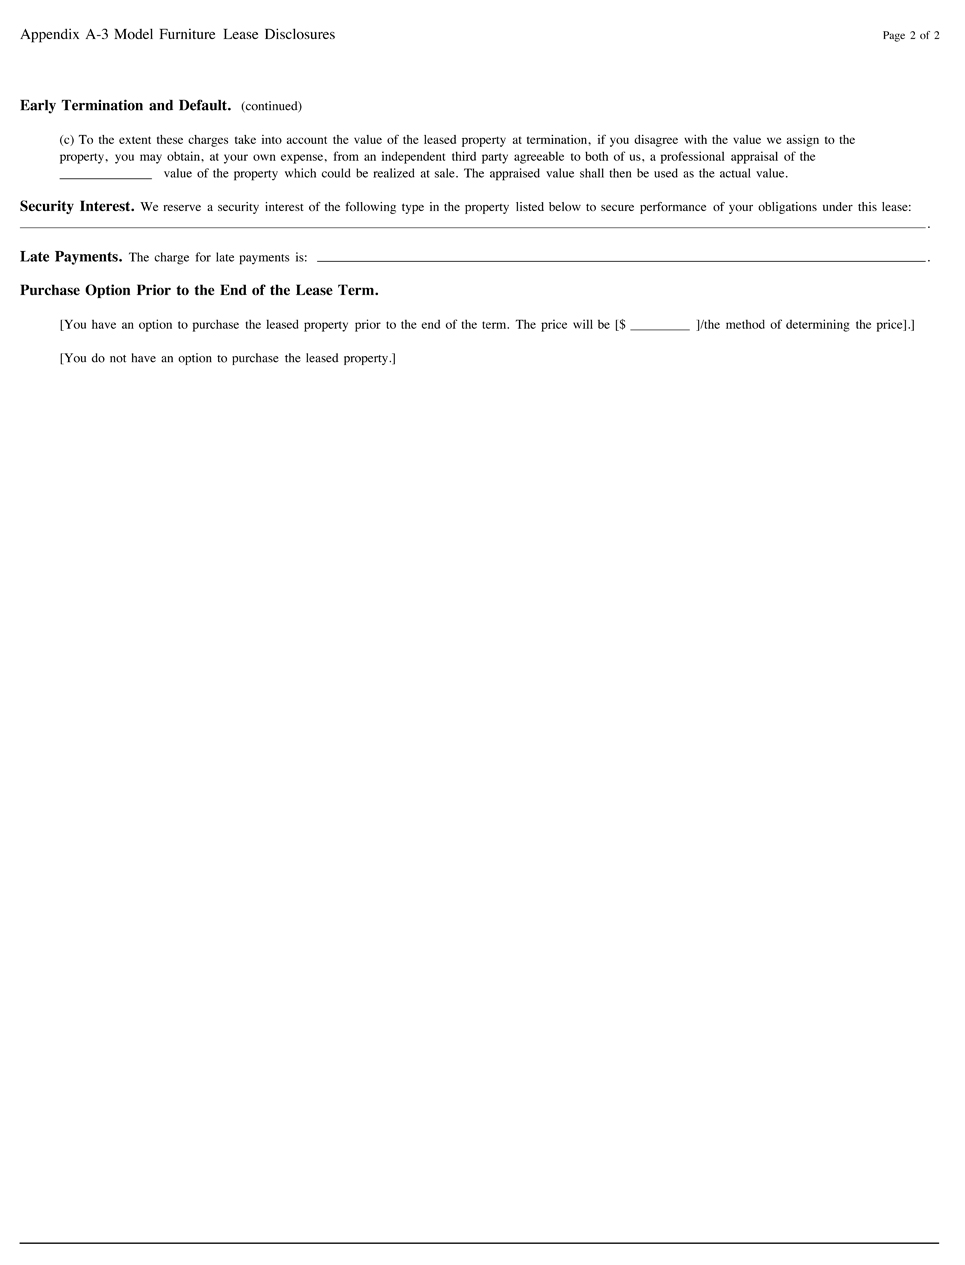 A-3—Model Furniture Lease Disclosures Page 2